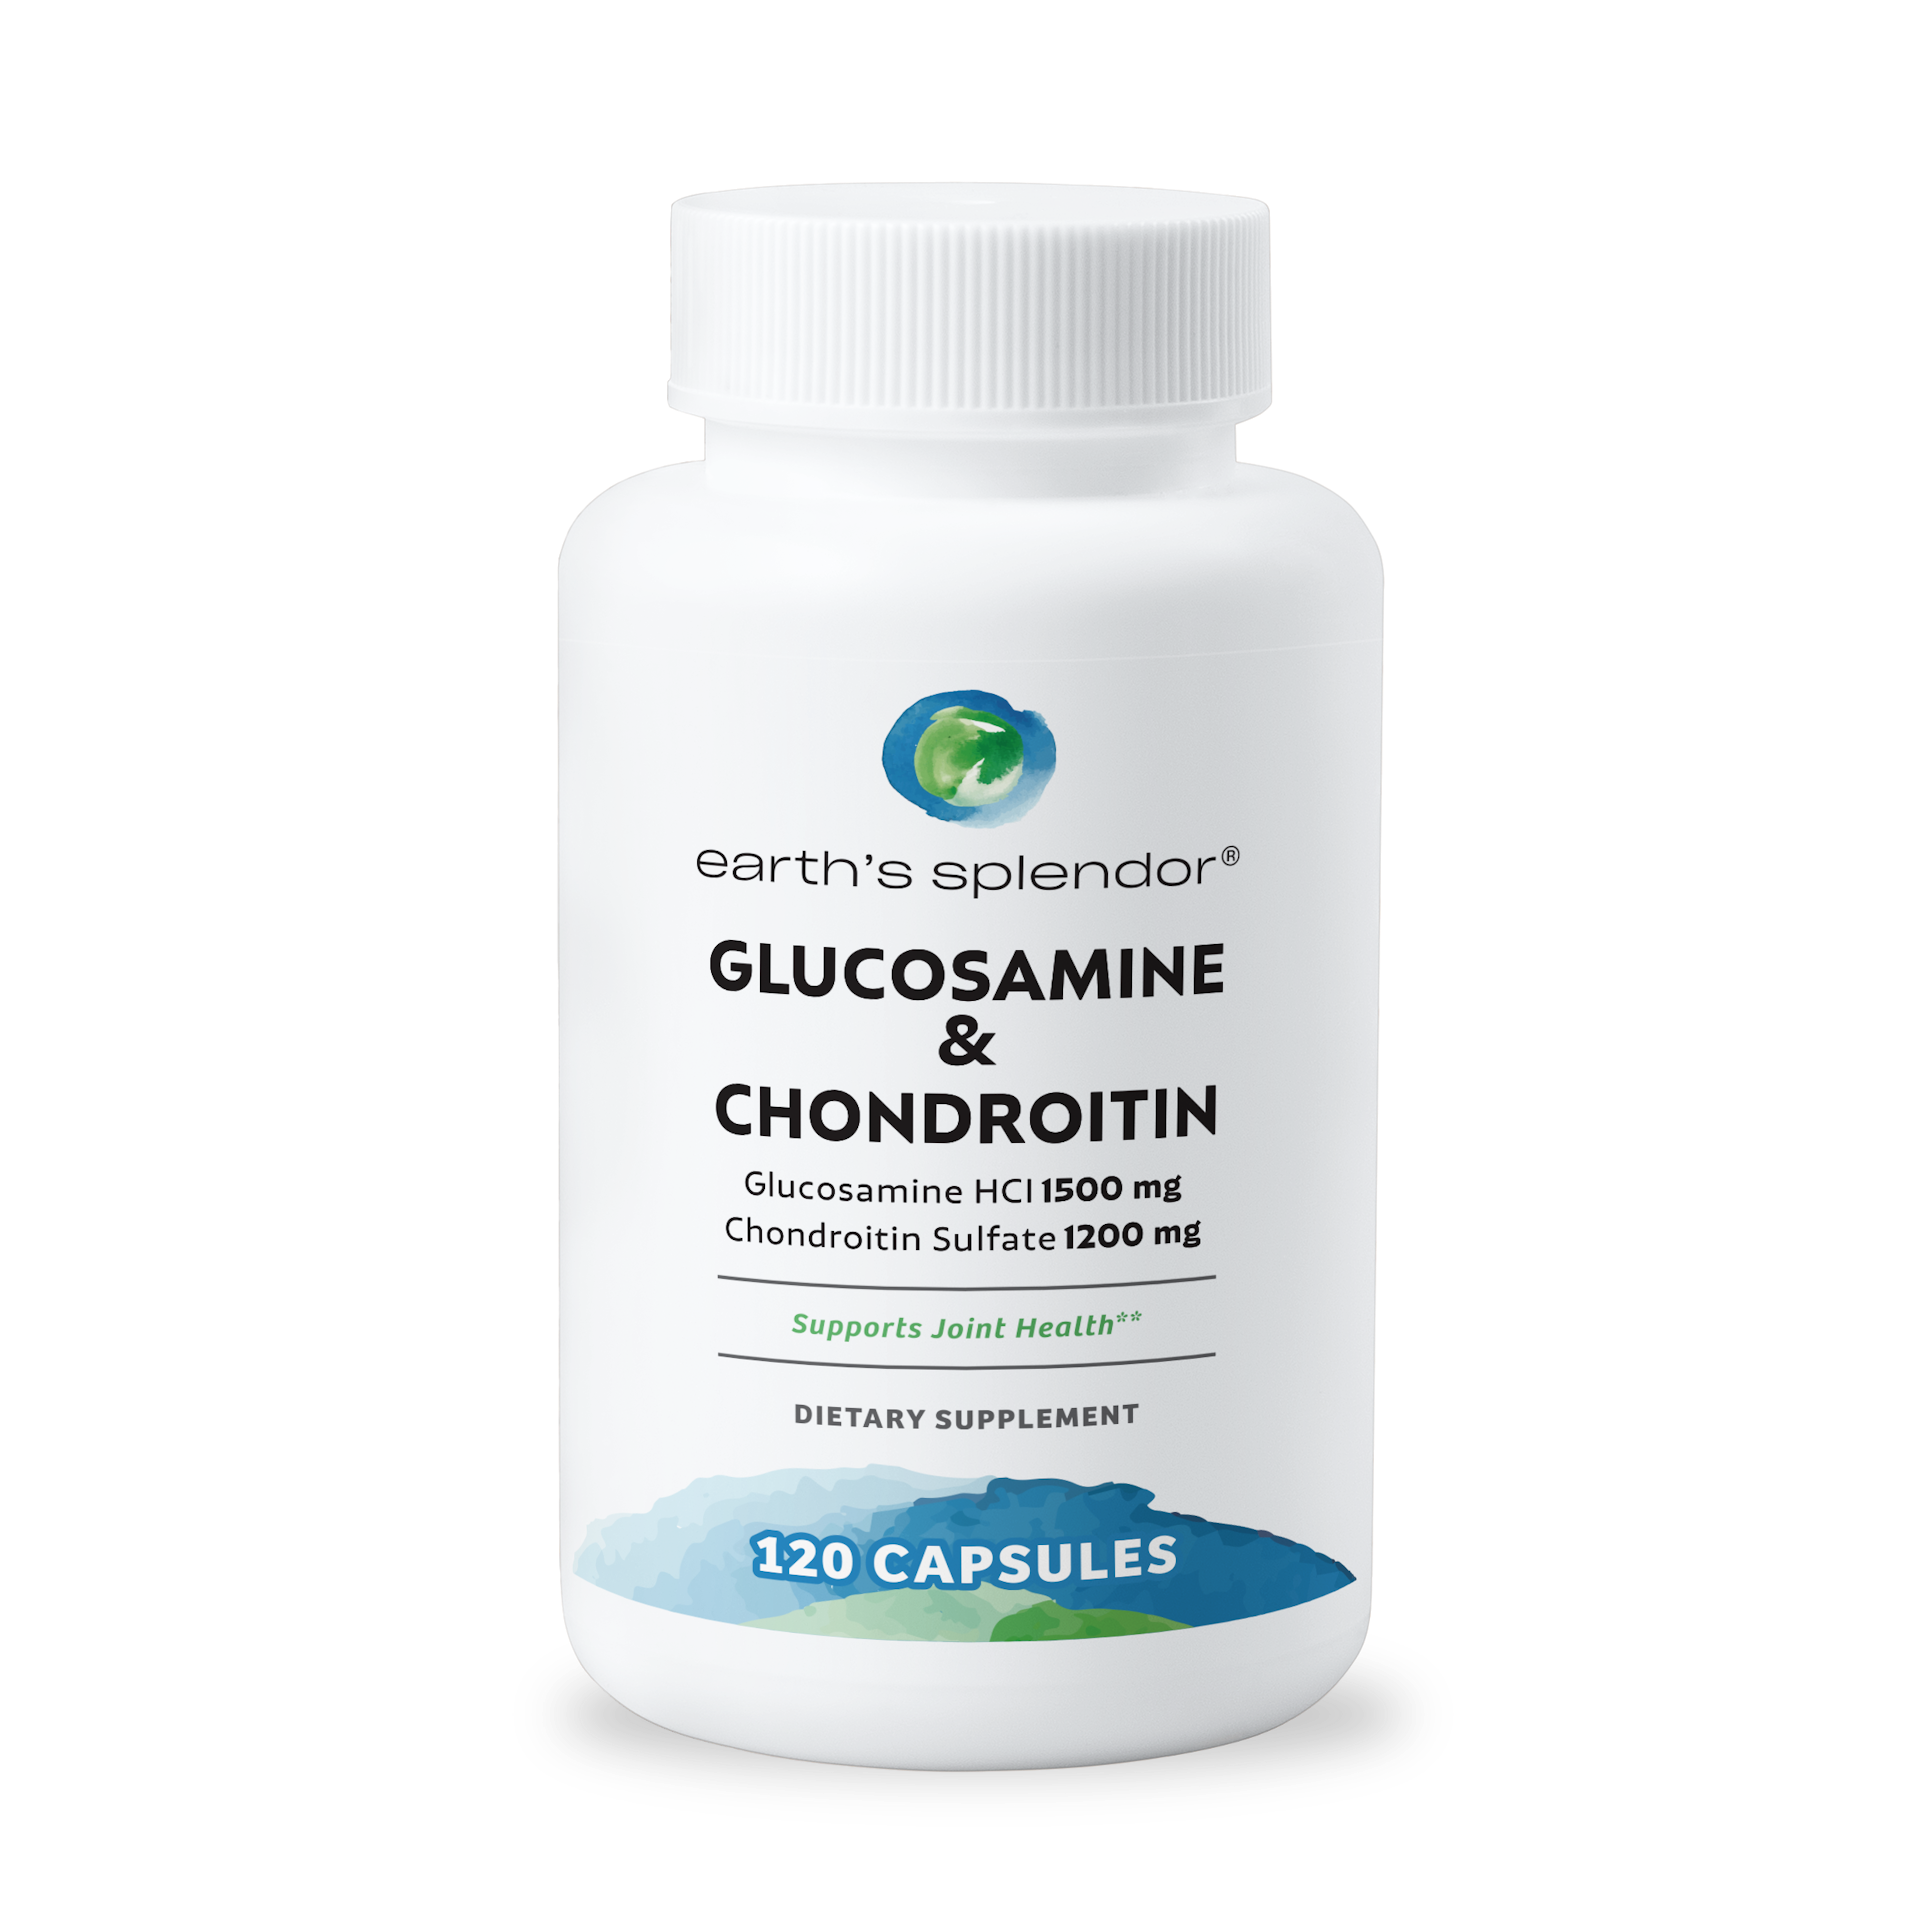 Picture of Earths-Splendor_Glucosamine Chondroitin.png